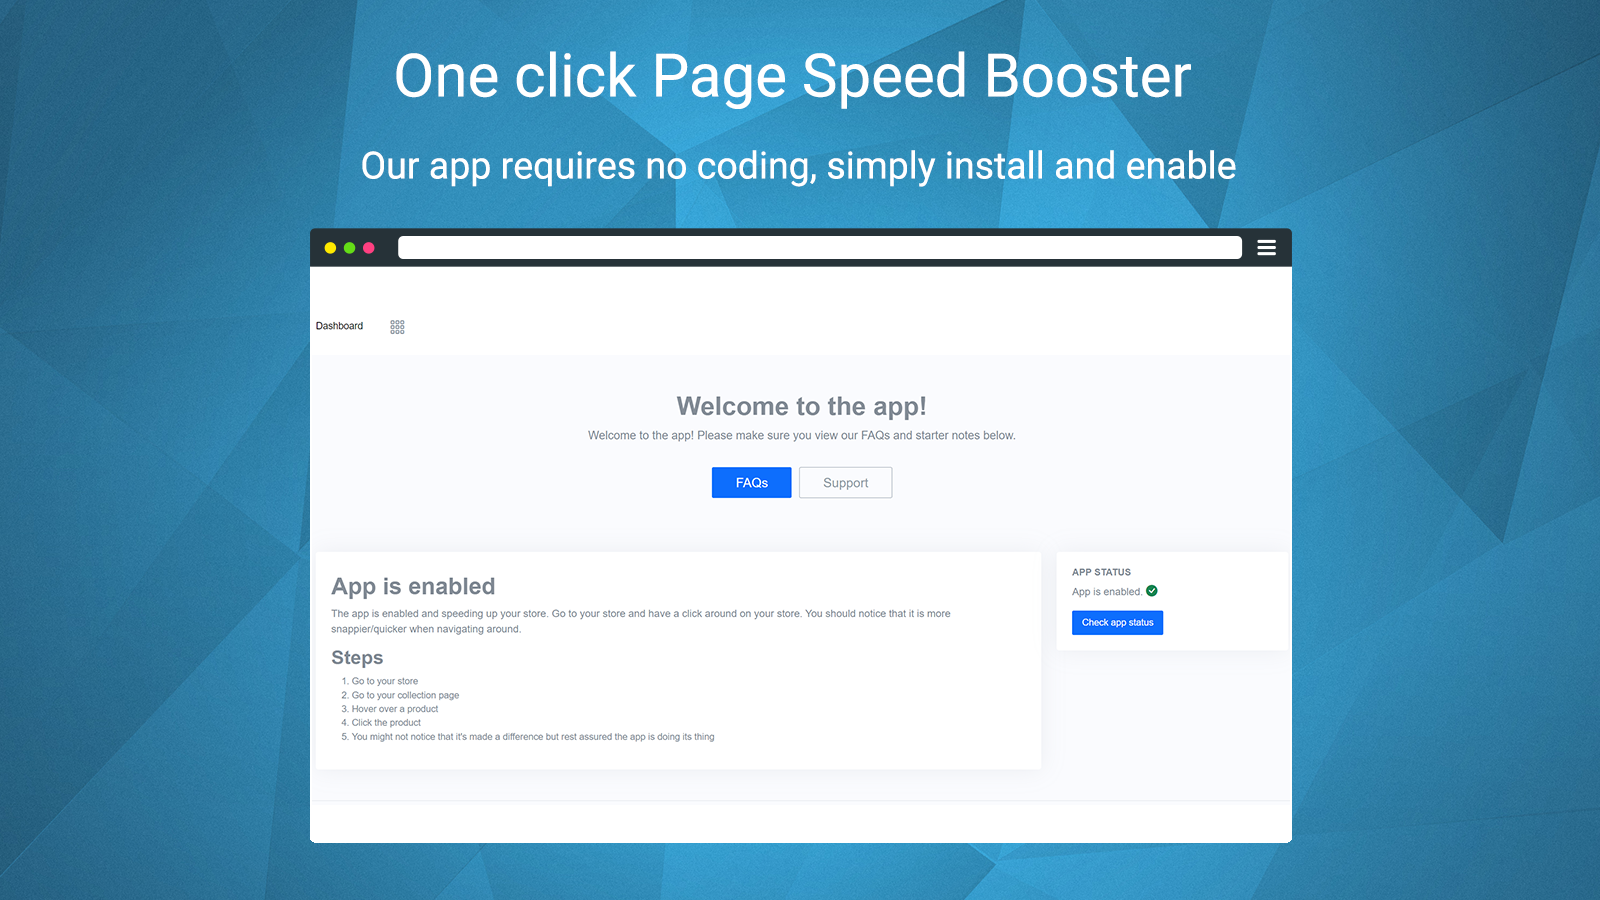 One click page speed boost